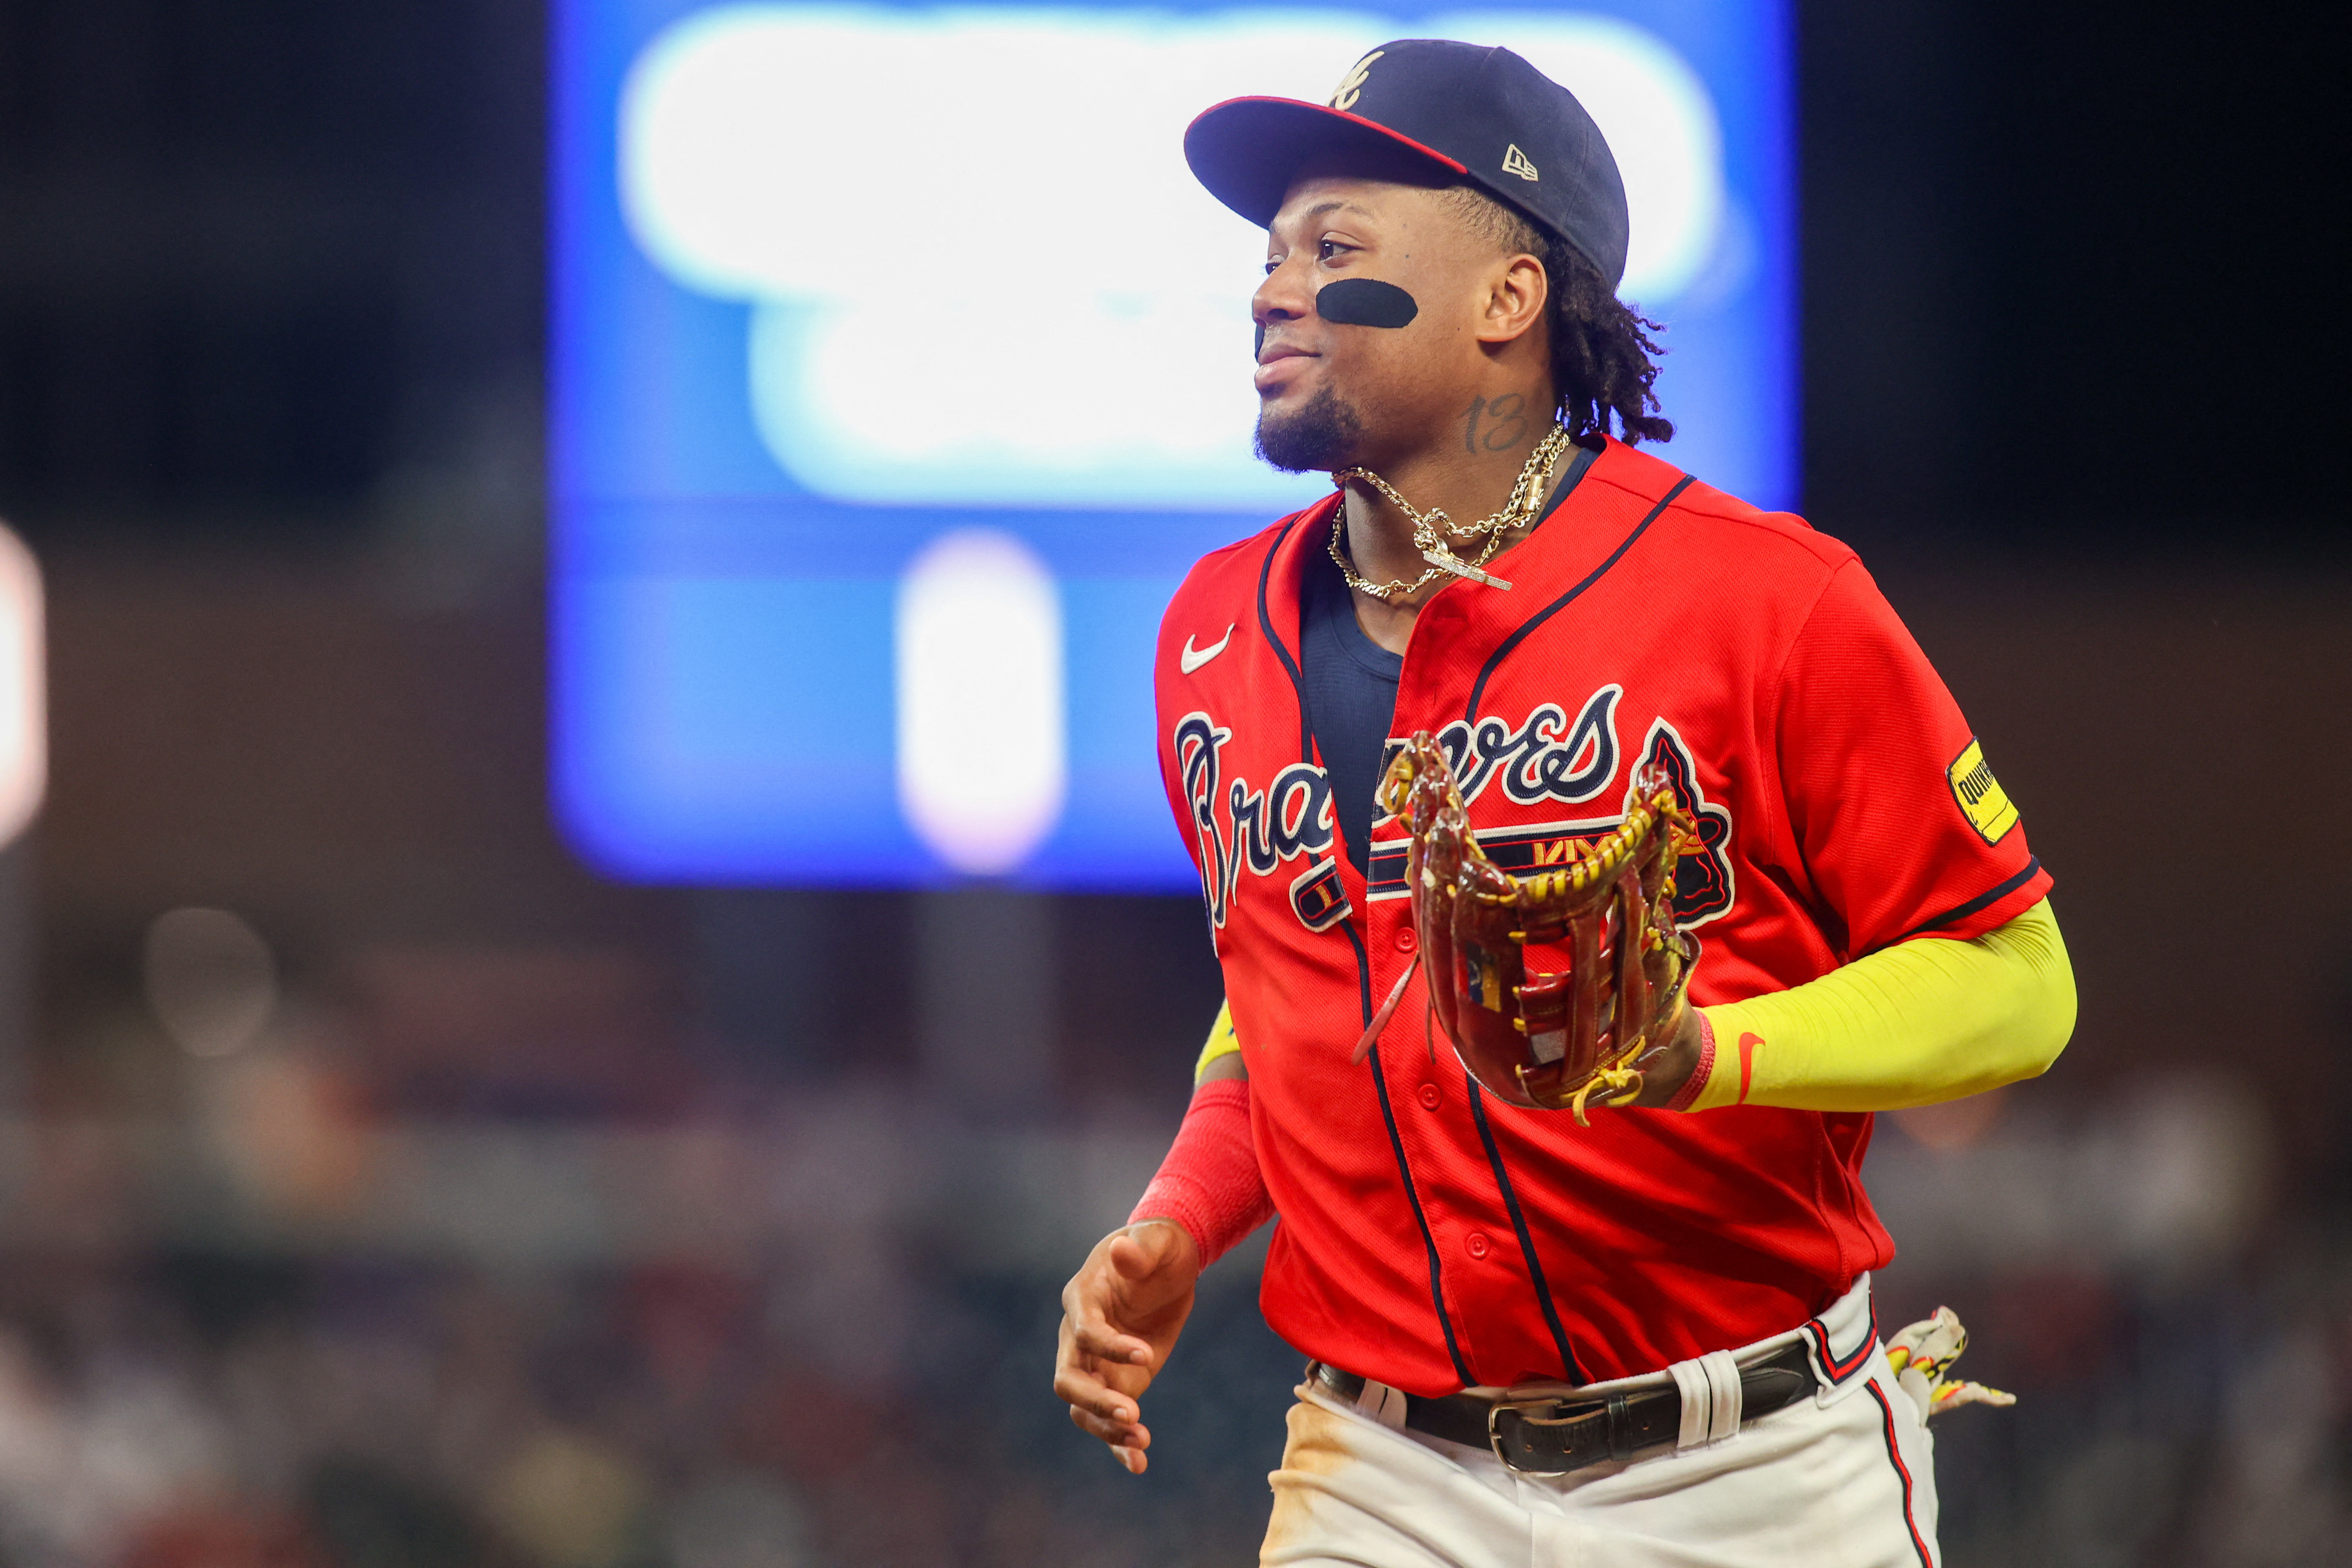 Strider strikes out 10 in 7 innings, Braves beat Giants 4-0 for 3rd  straight shutout - Newsday